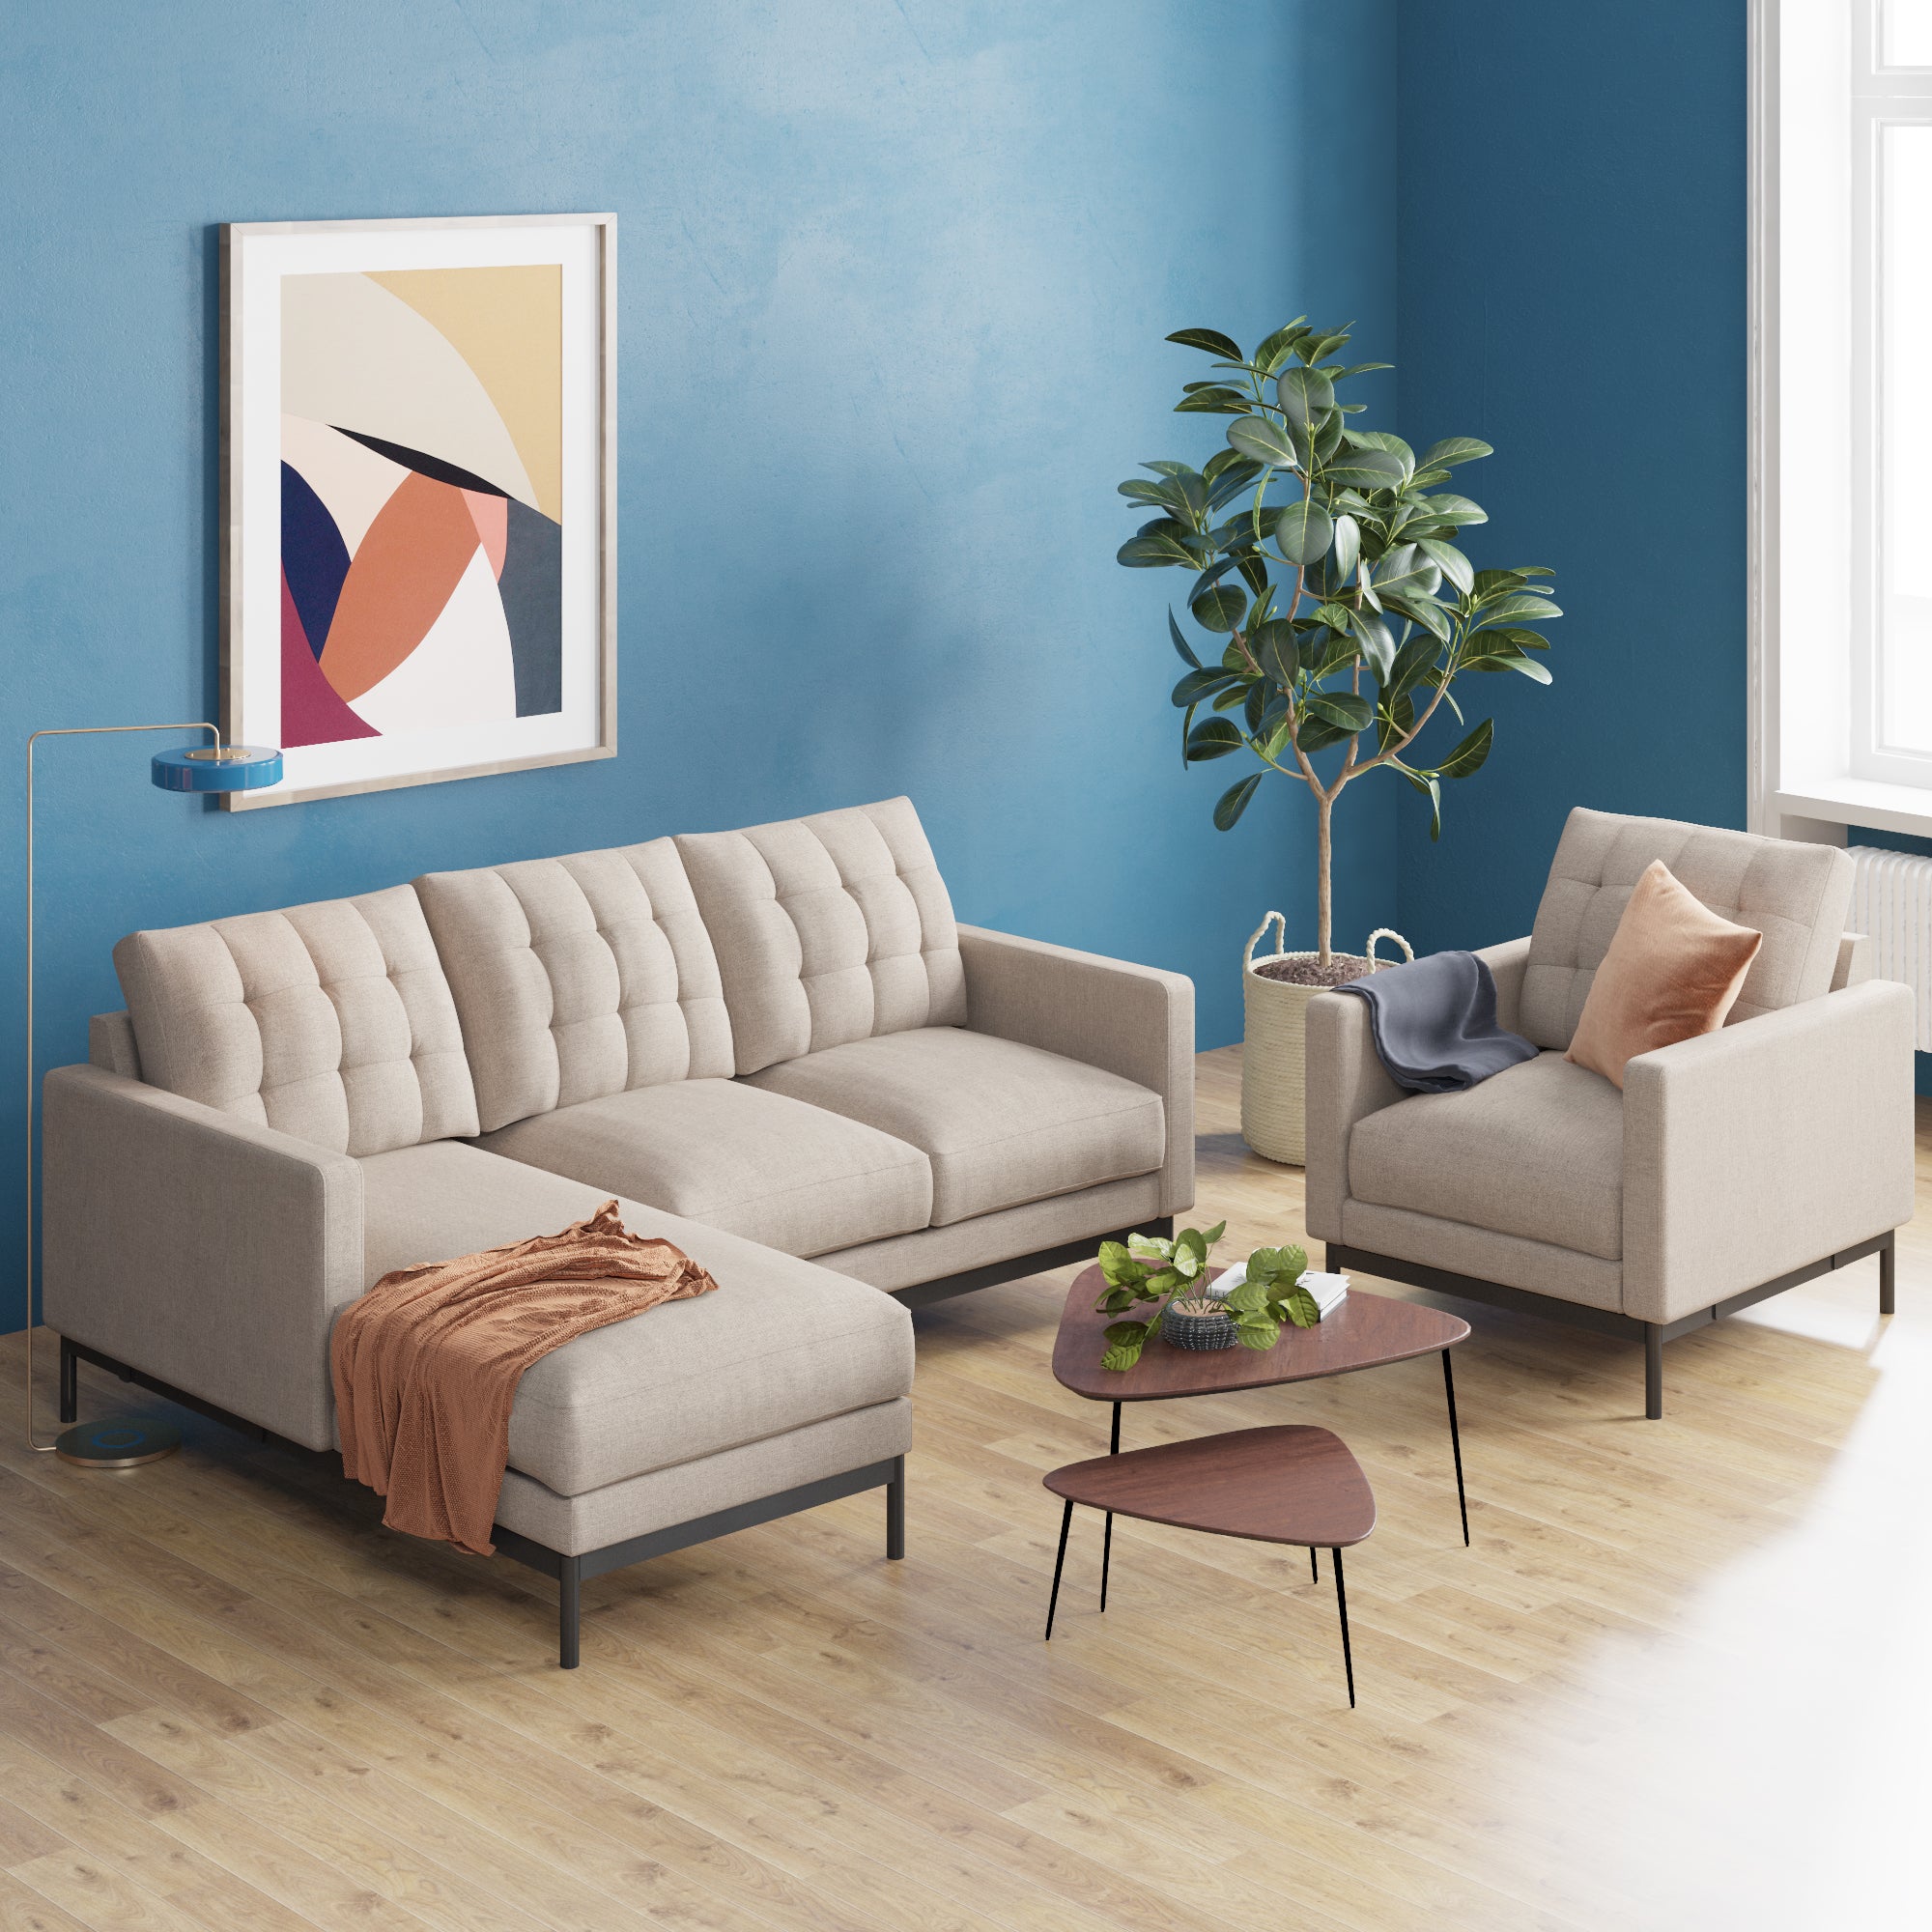 Thompson Reversible Chaise Sectional